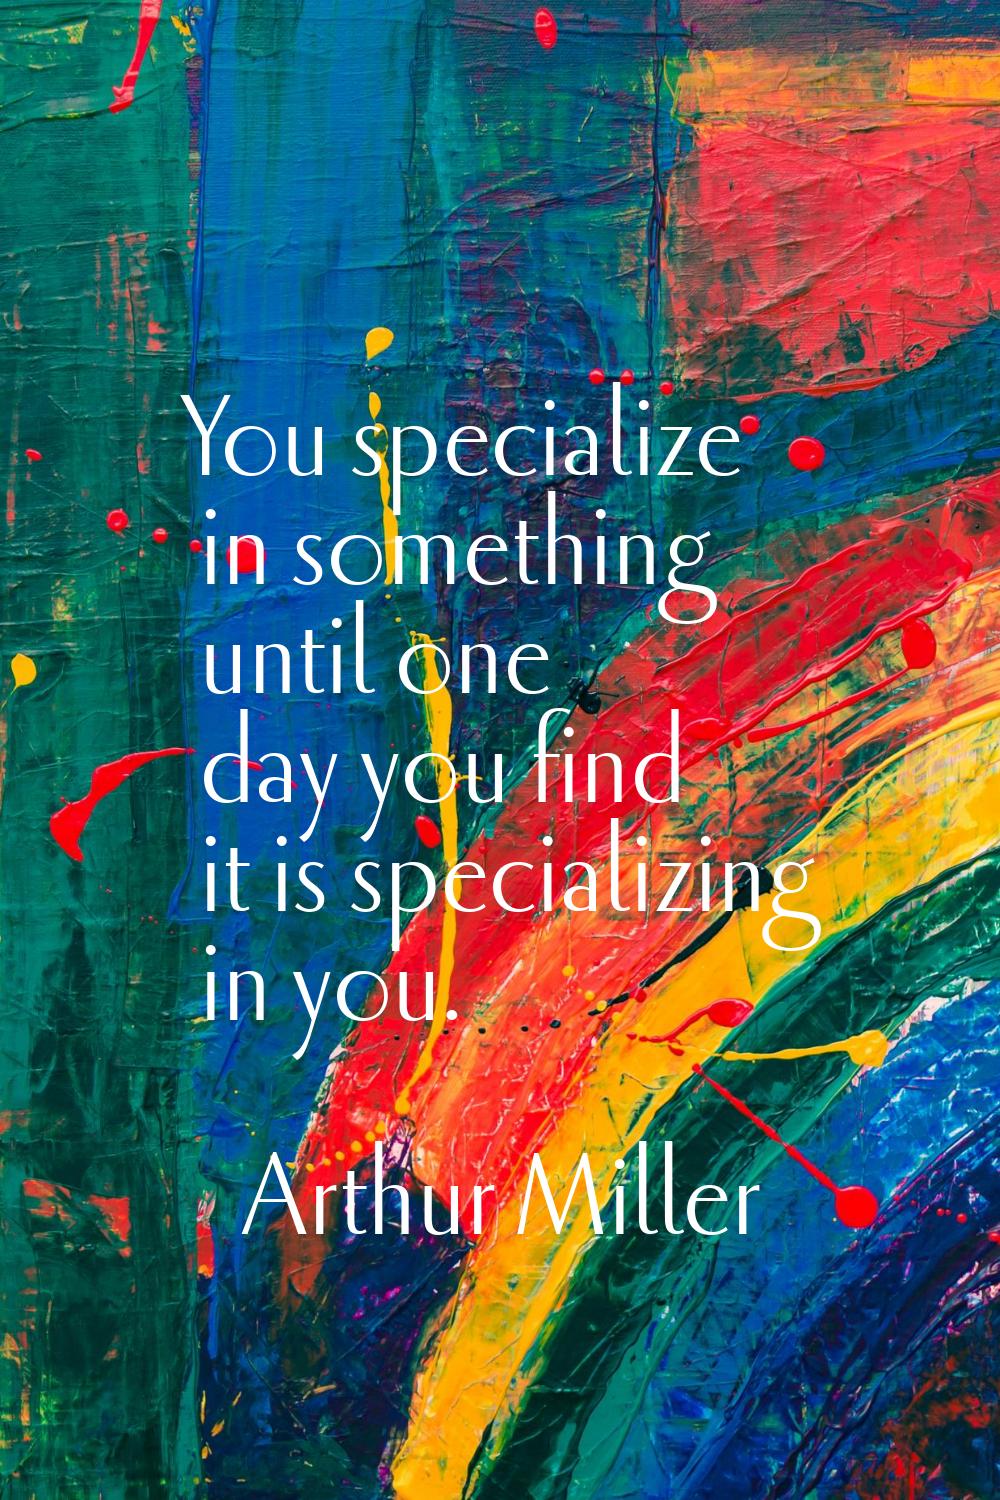 You specialize in something until one day you find it is specializing in you.